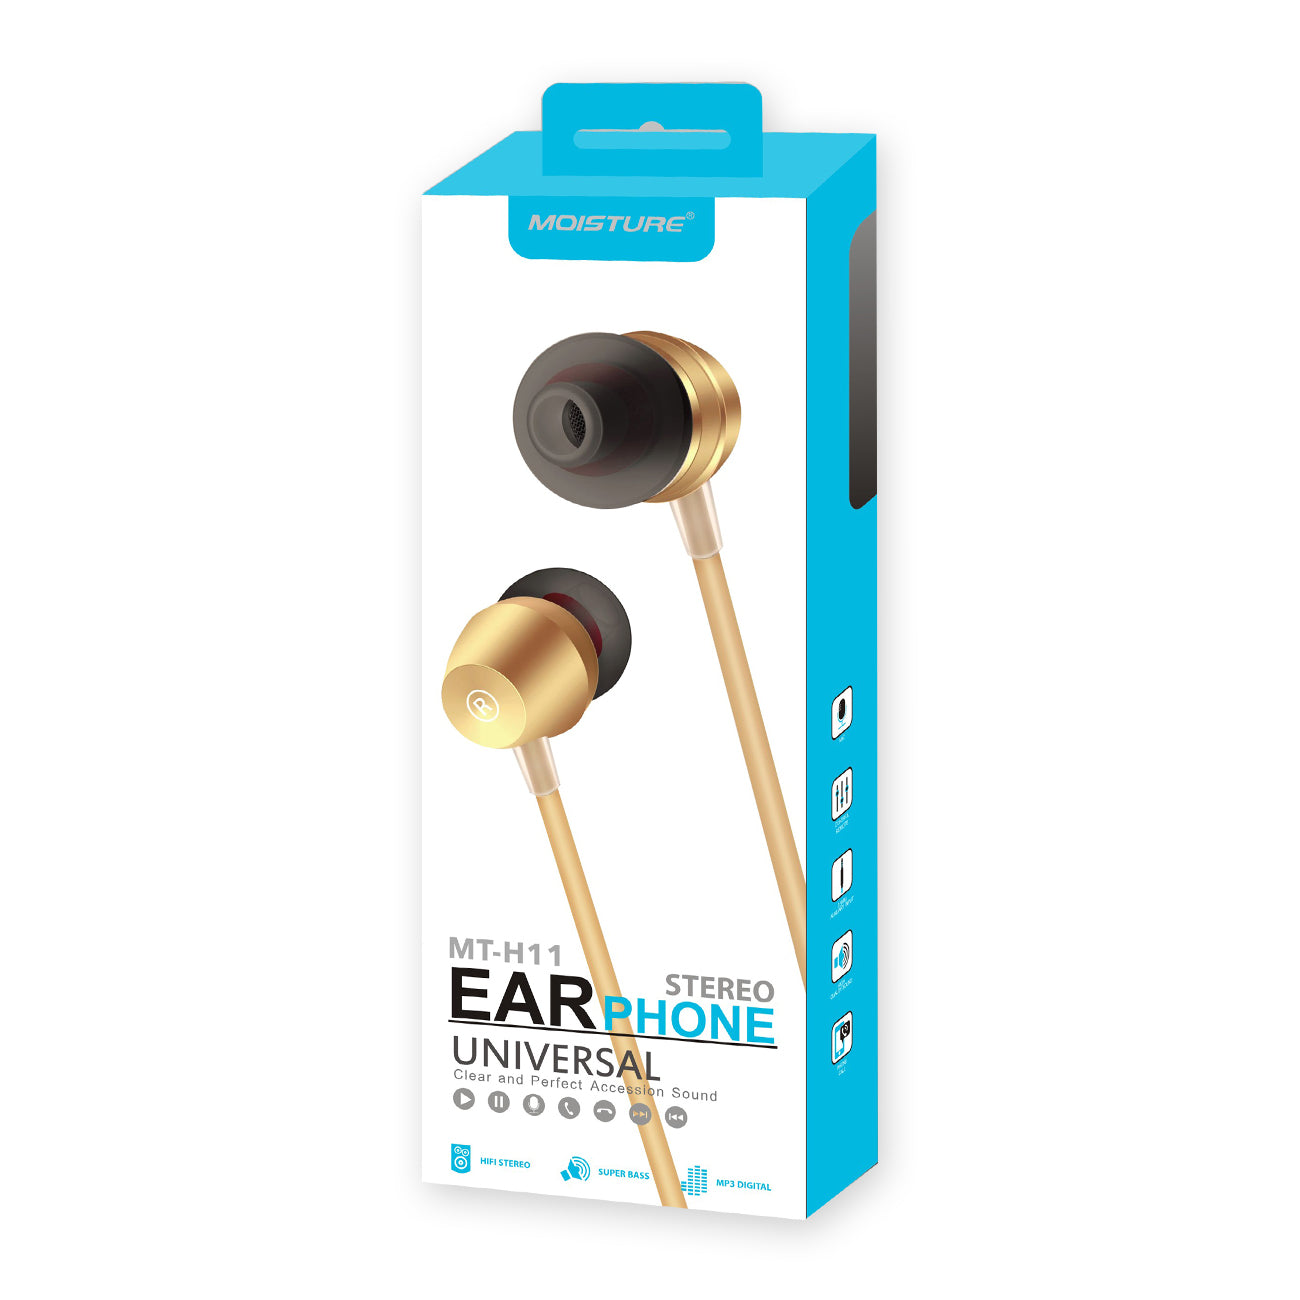 High Quality Sound Universal In-ear Earphones In Gold